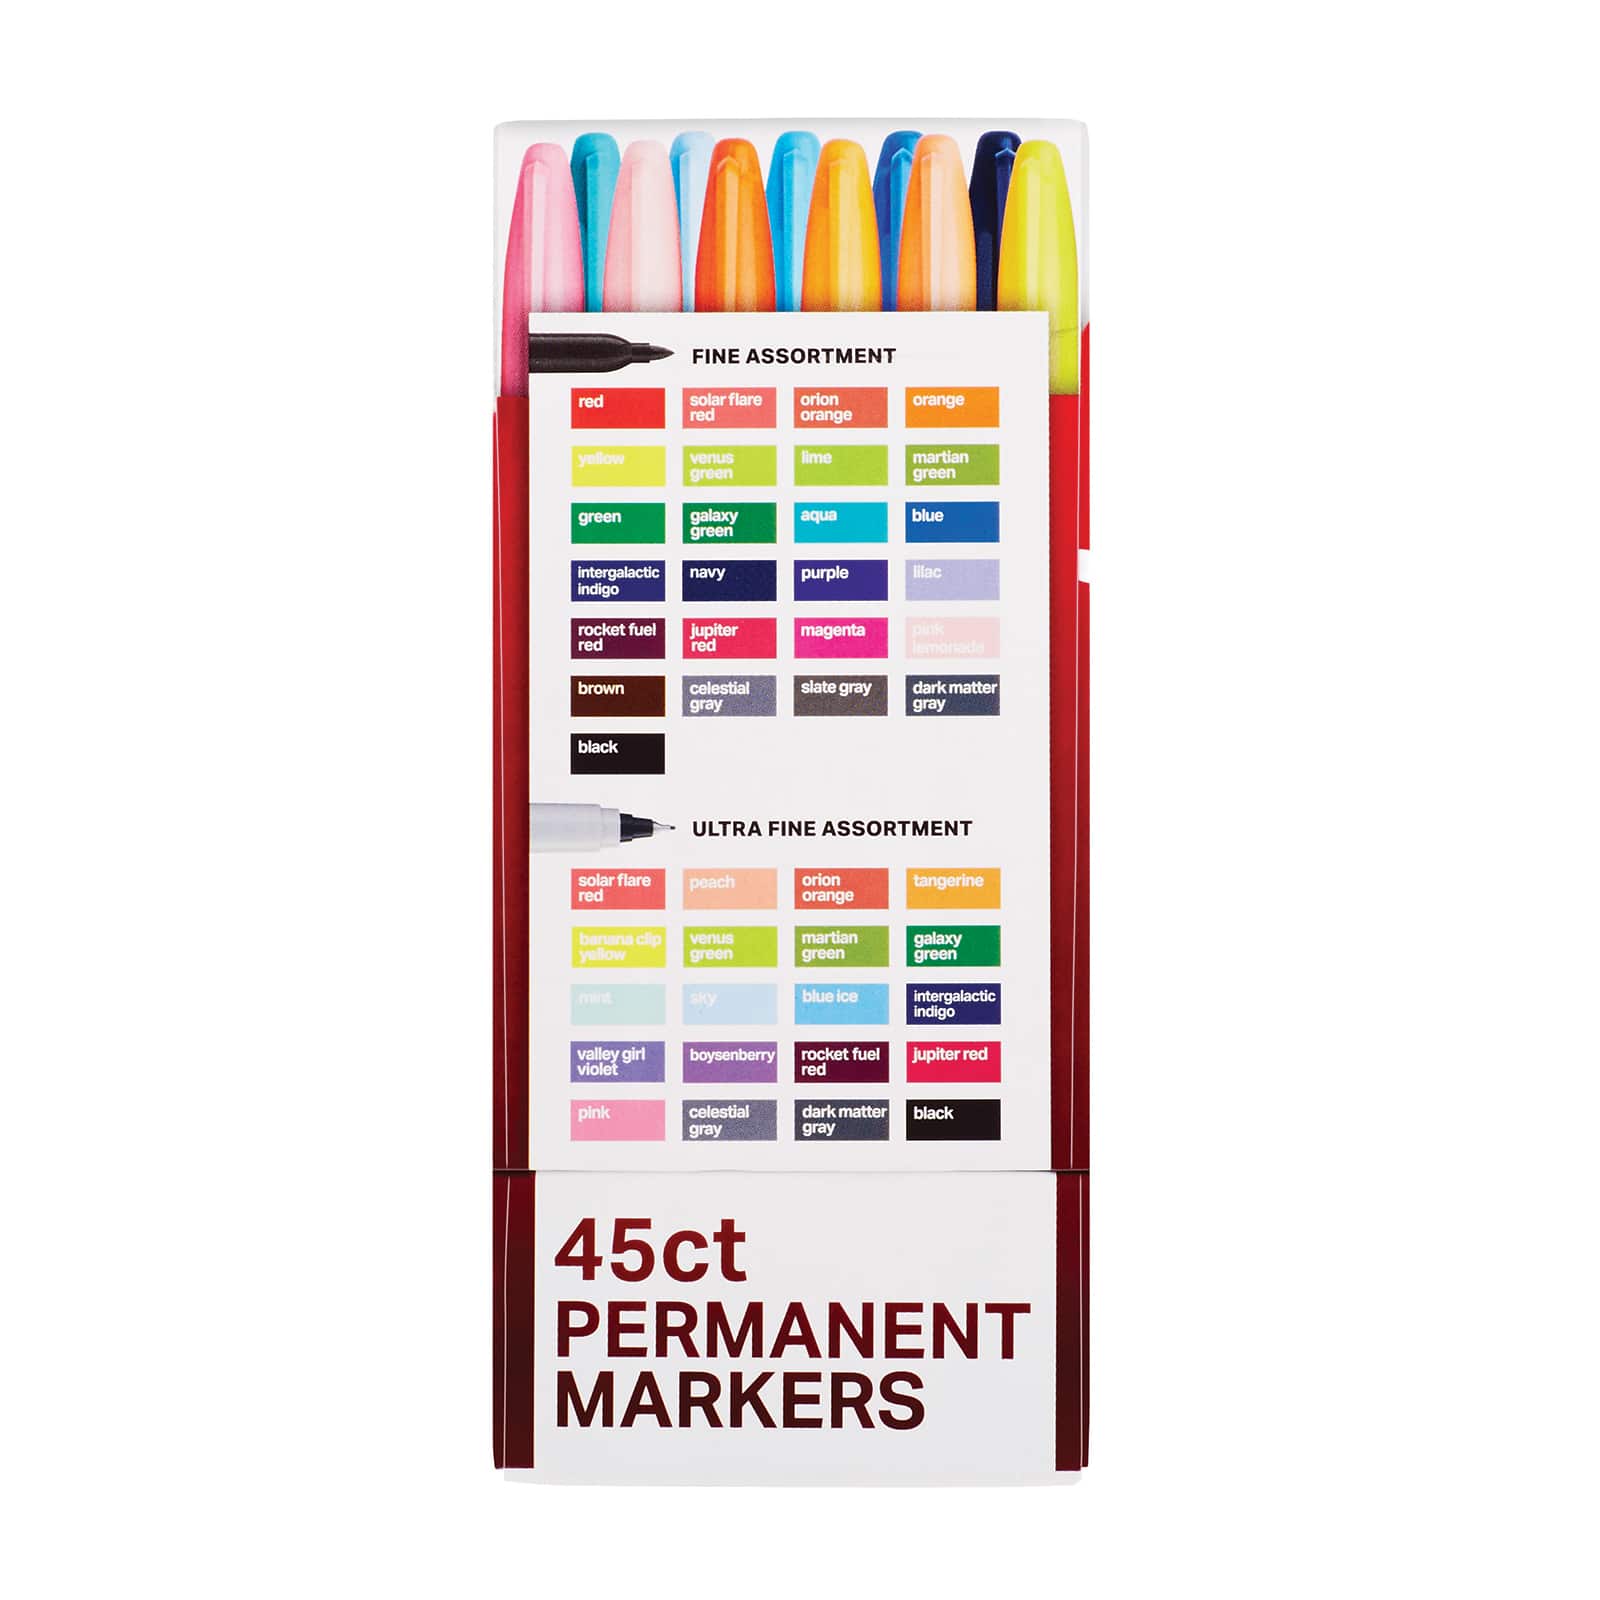 Sharpie Limited Edition 30 Count Permanent Markers 6 Ultra Fine 18 Fine and 6 Re-released Fine